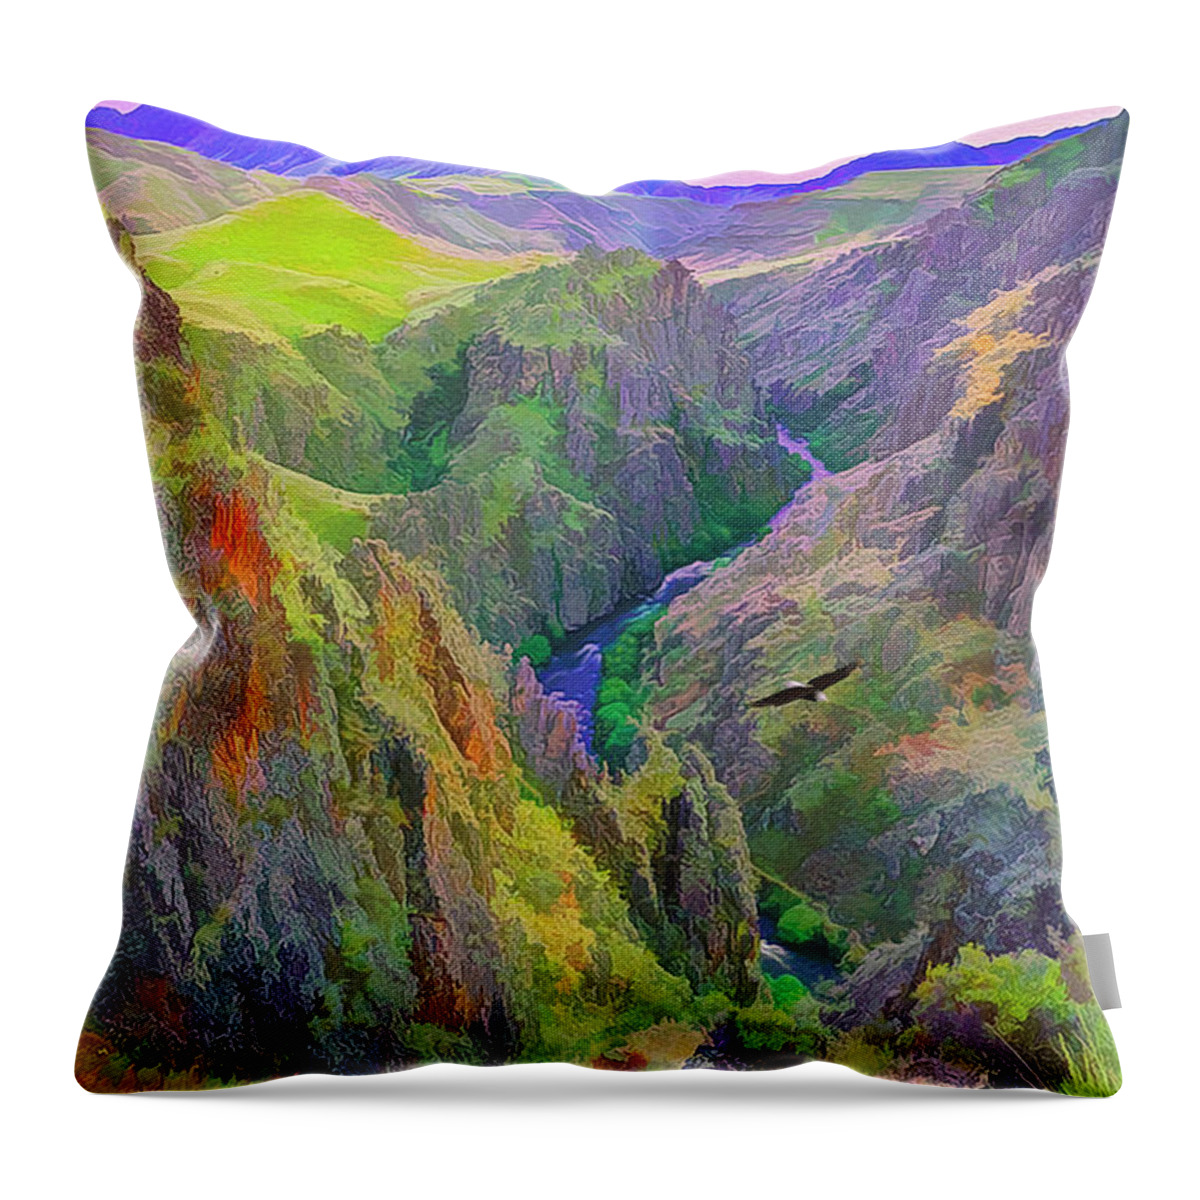 Black Canyon Throw Pillow featuring the digital art Black Canyon by Walter Colvin